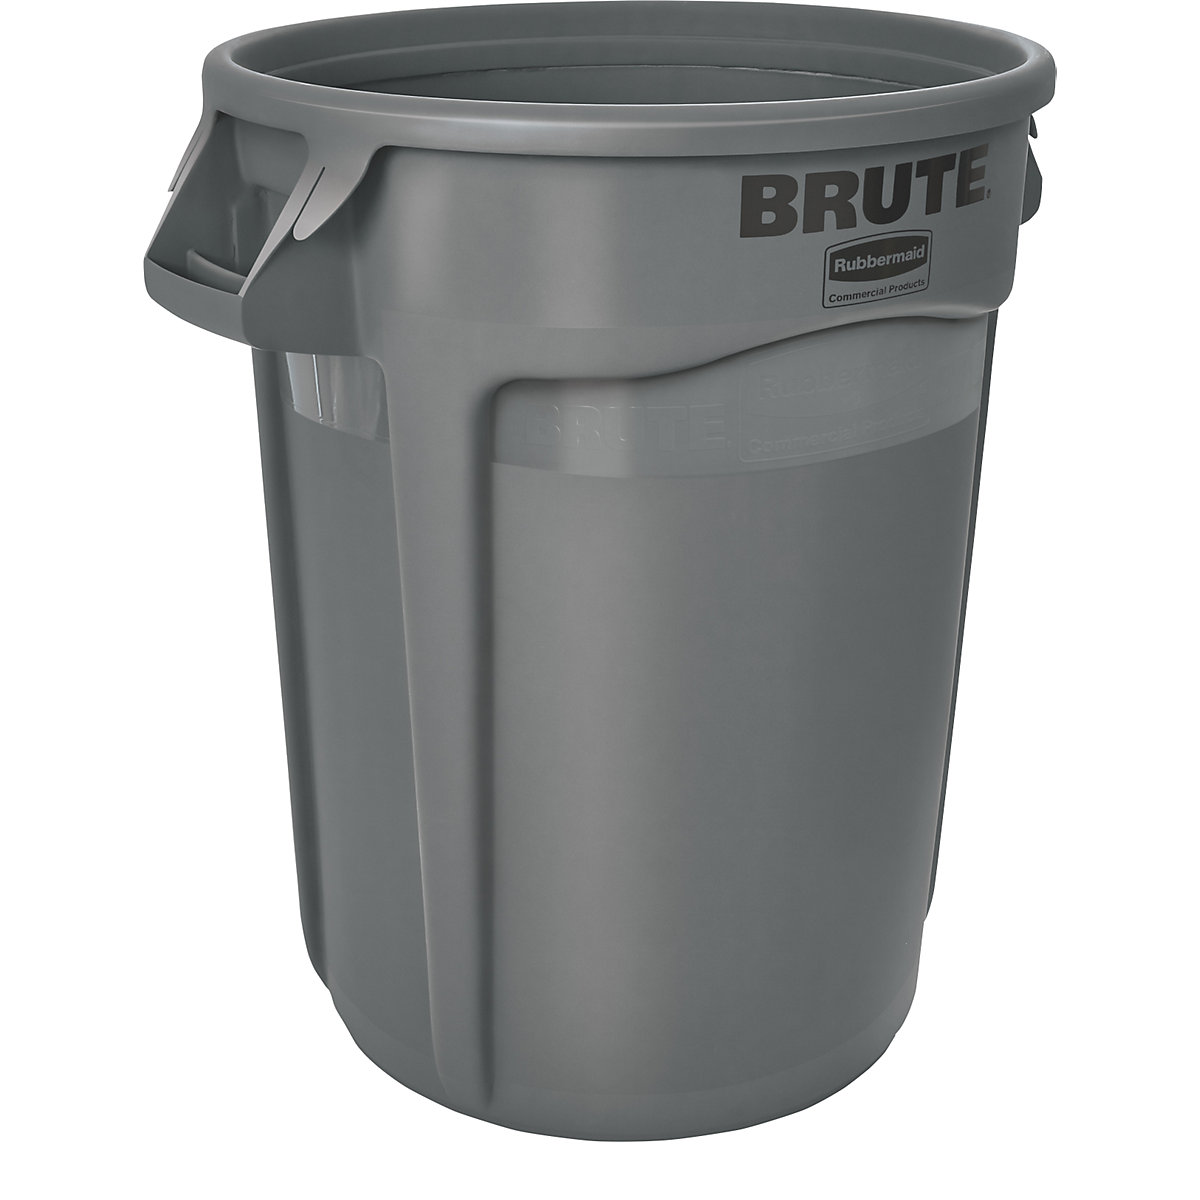 BRUTE® universal container, round – Rubbermaid